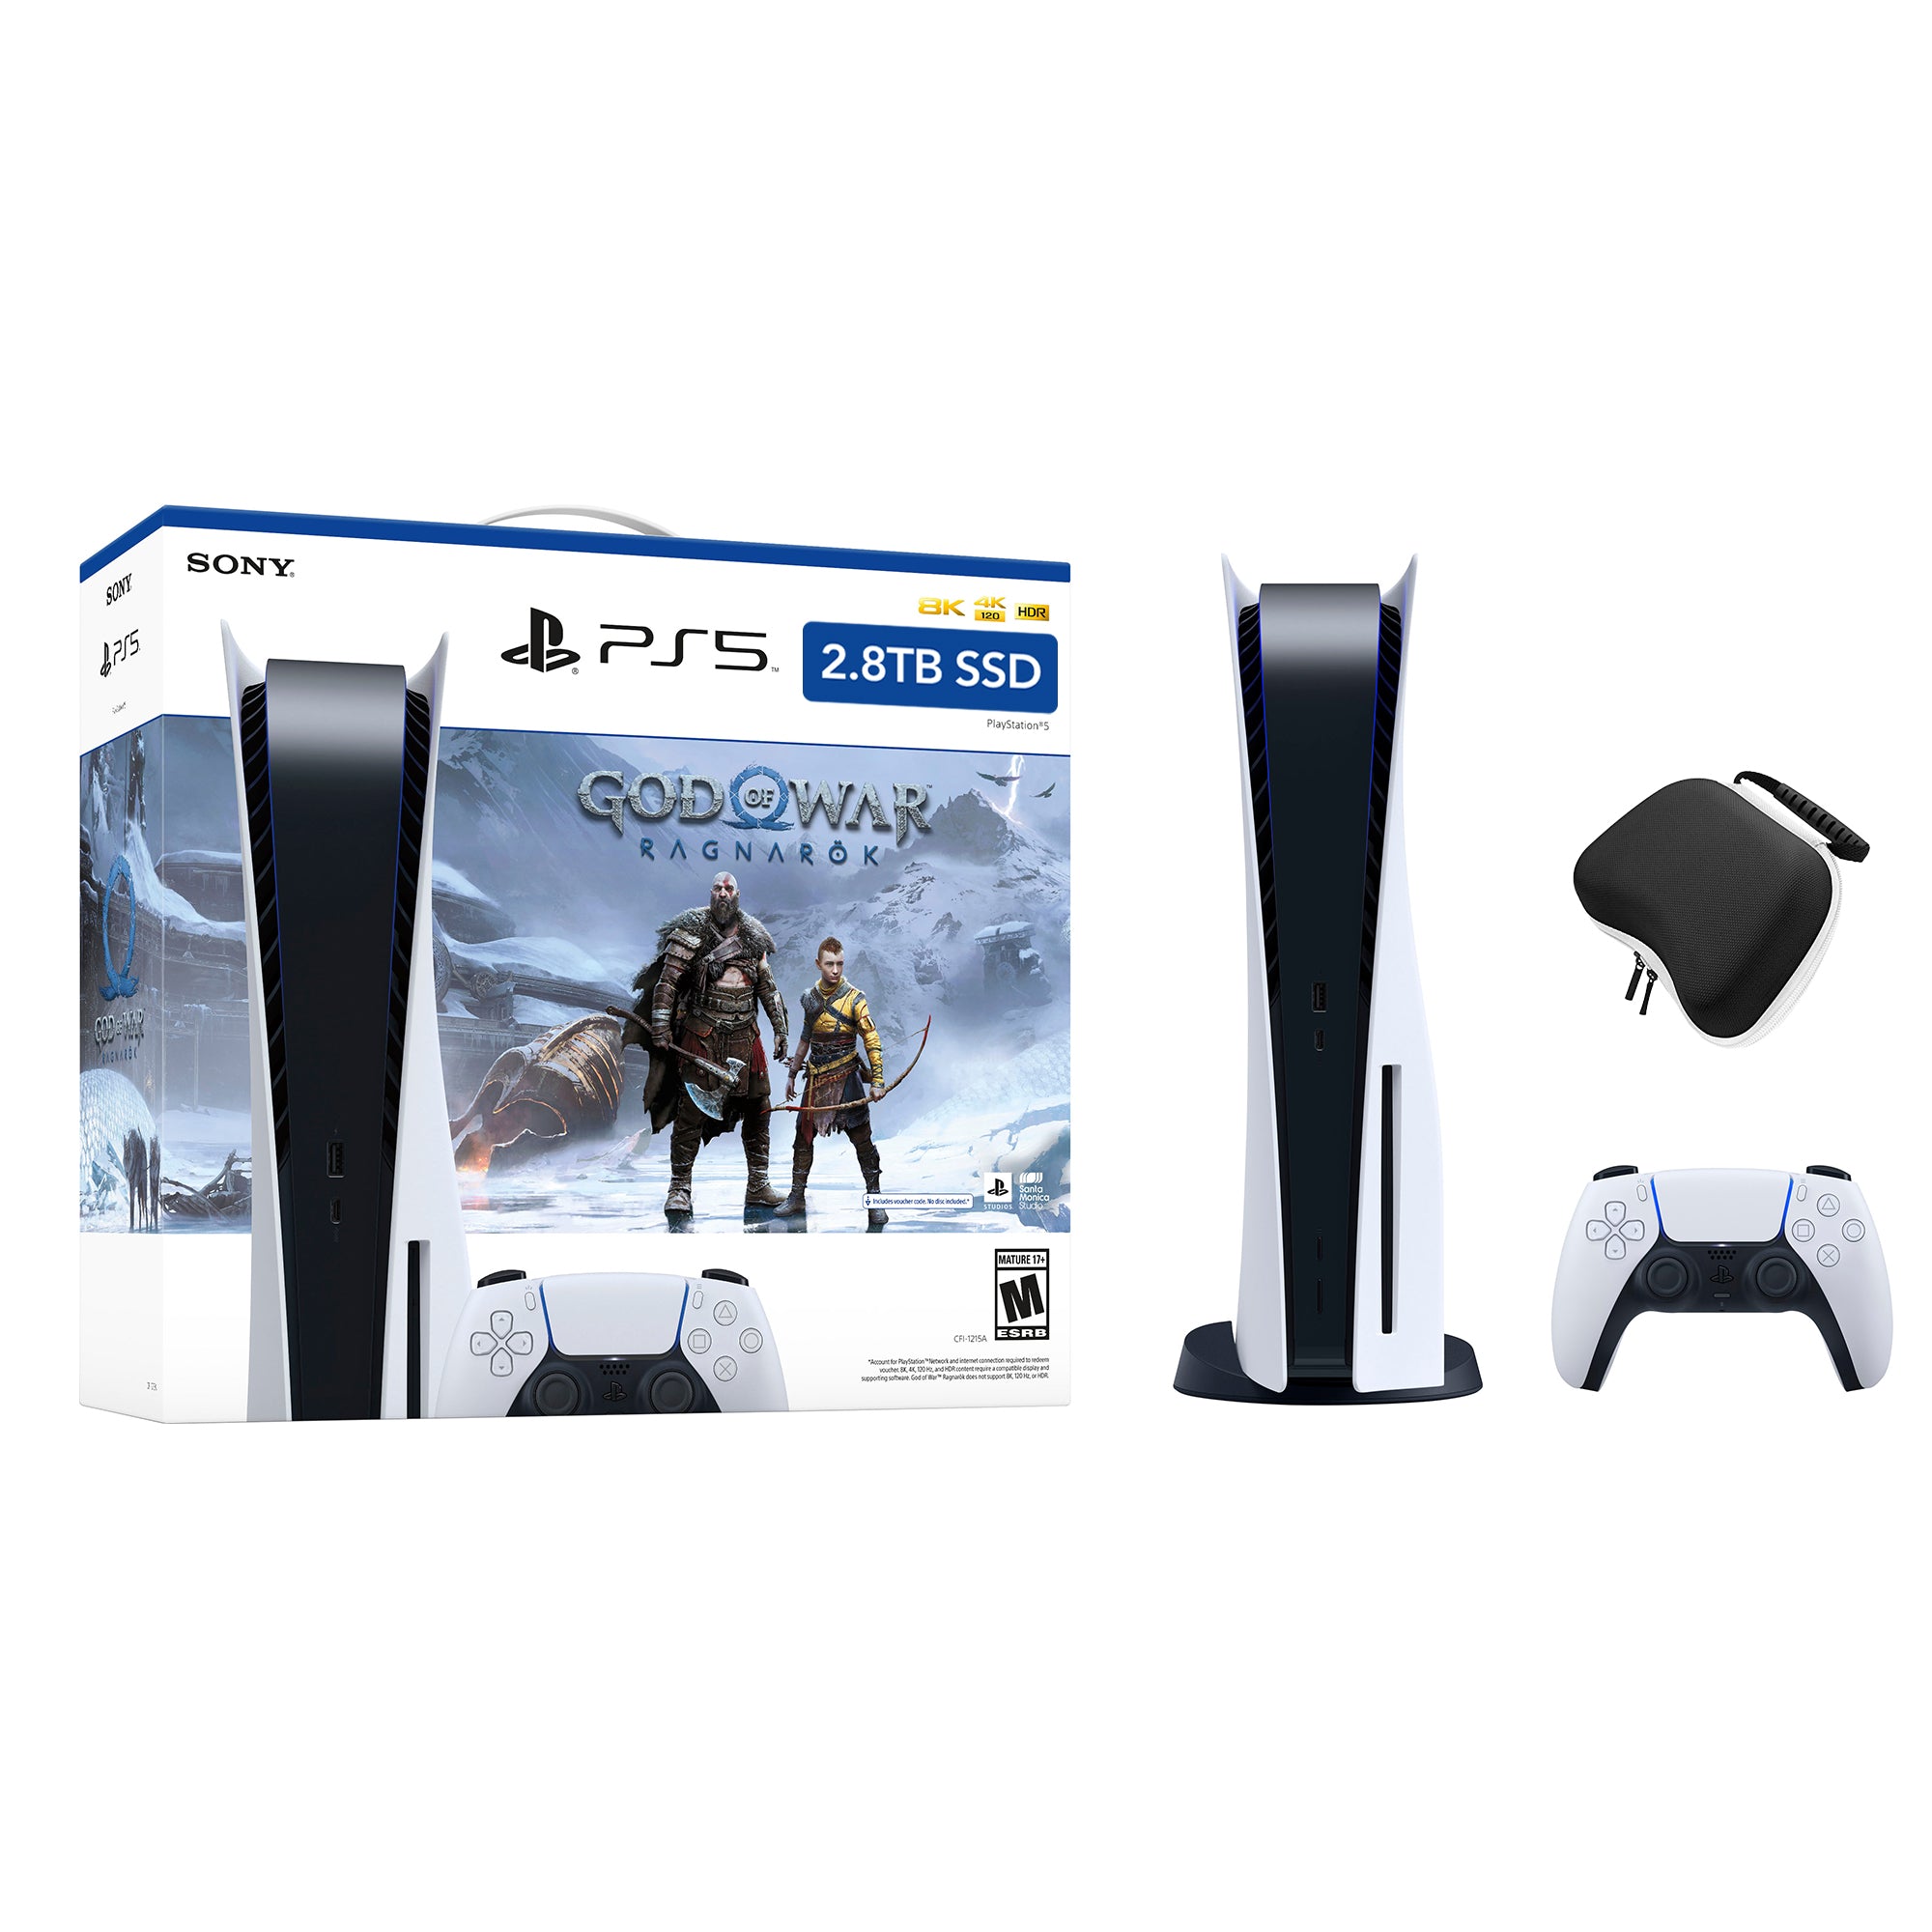 PlayStation 5 Upgraded 2.8TB Disc Edition God of War Ragnarok Bundle and Mytrix Controller Case - White, PS5 Gaming Console